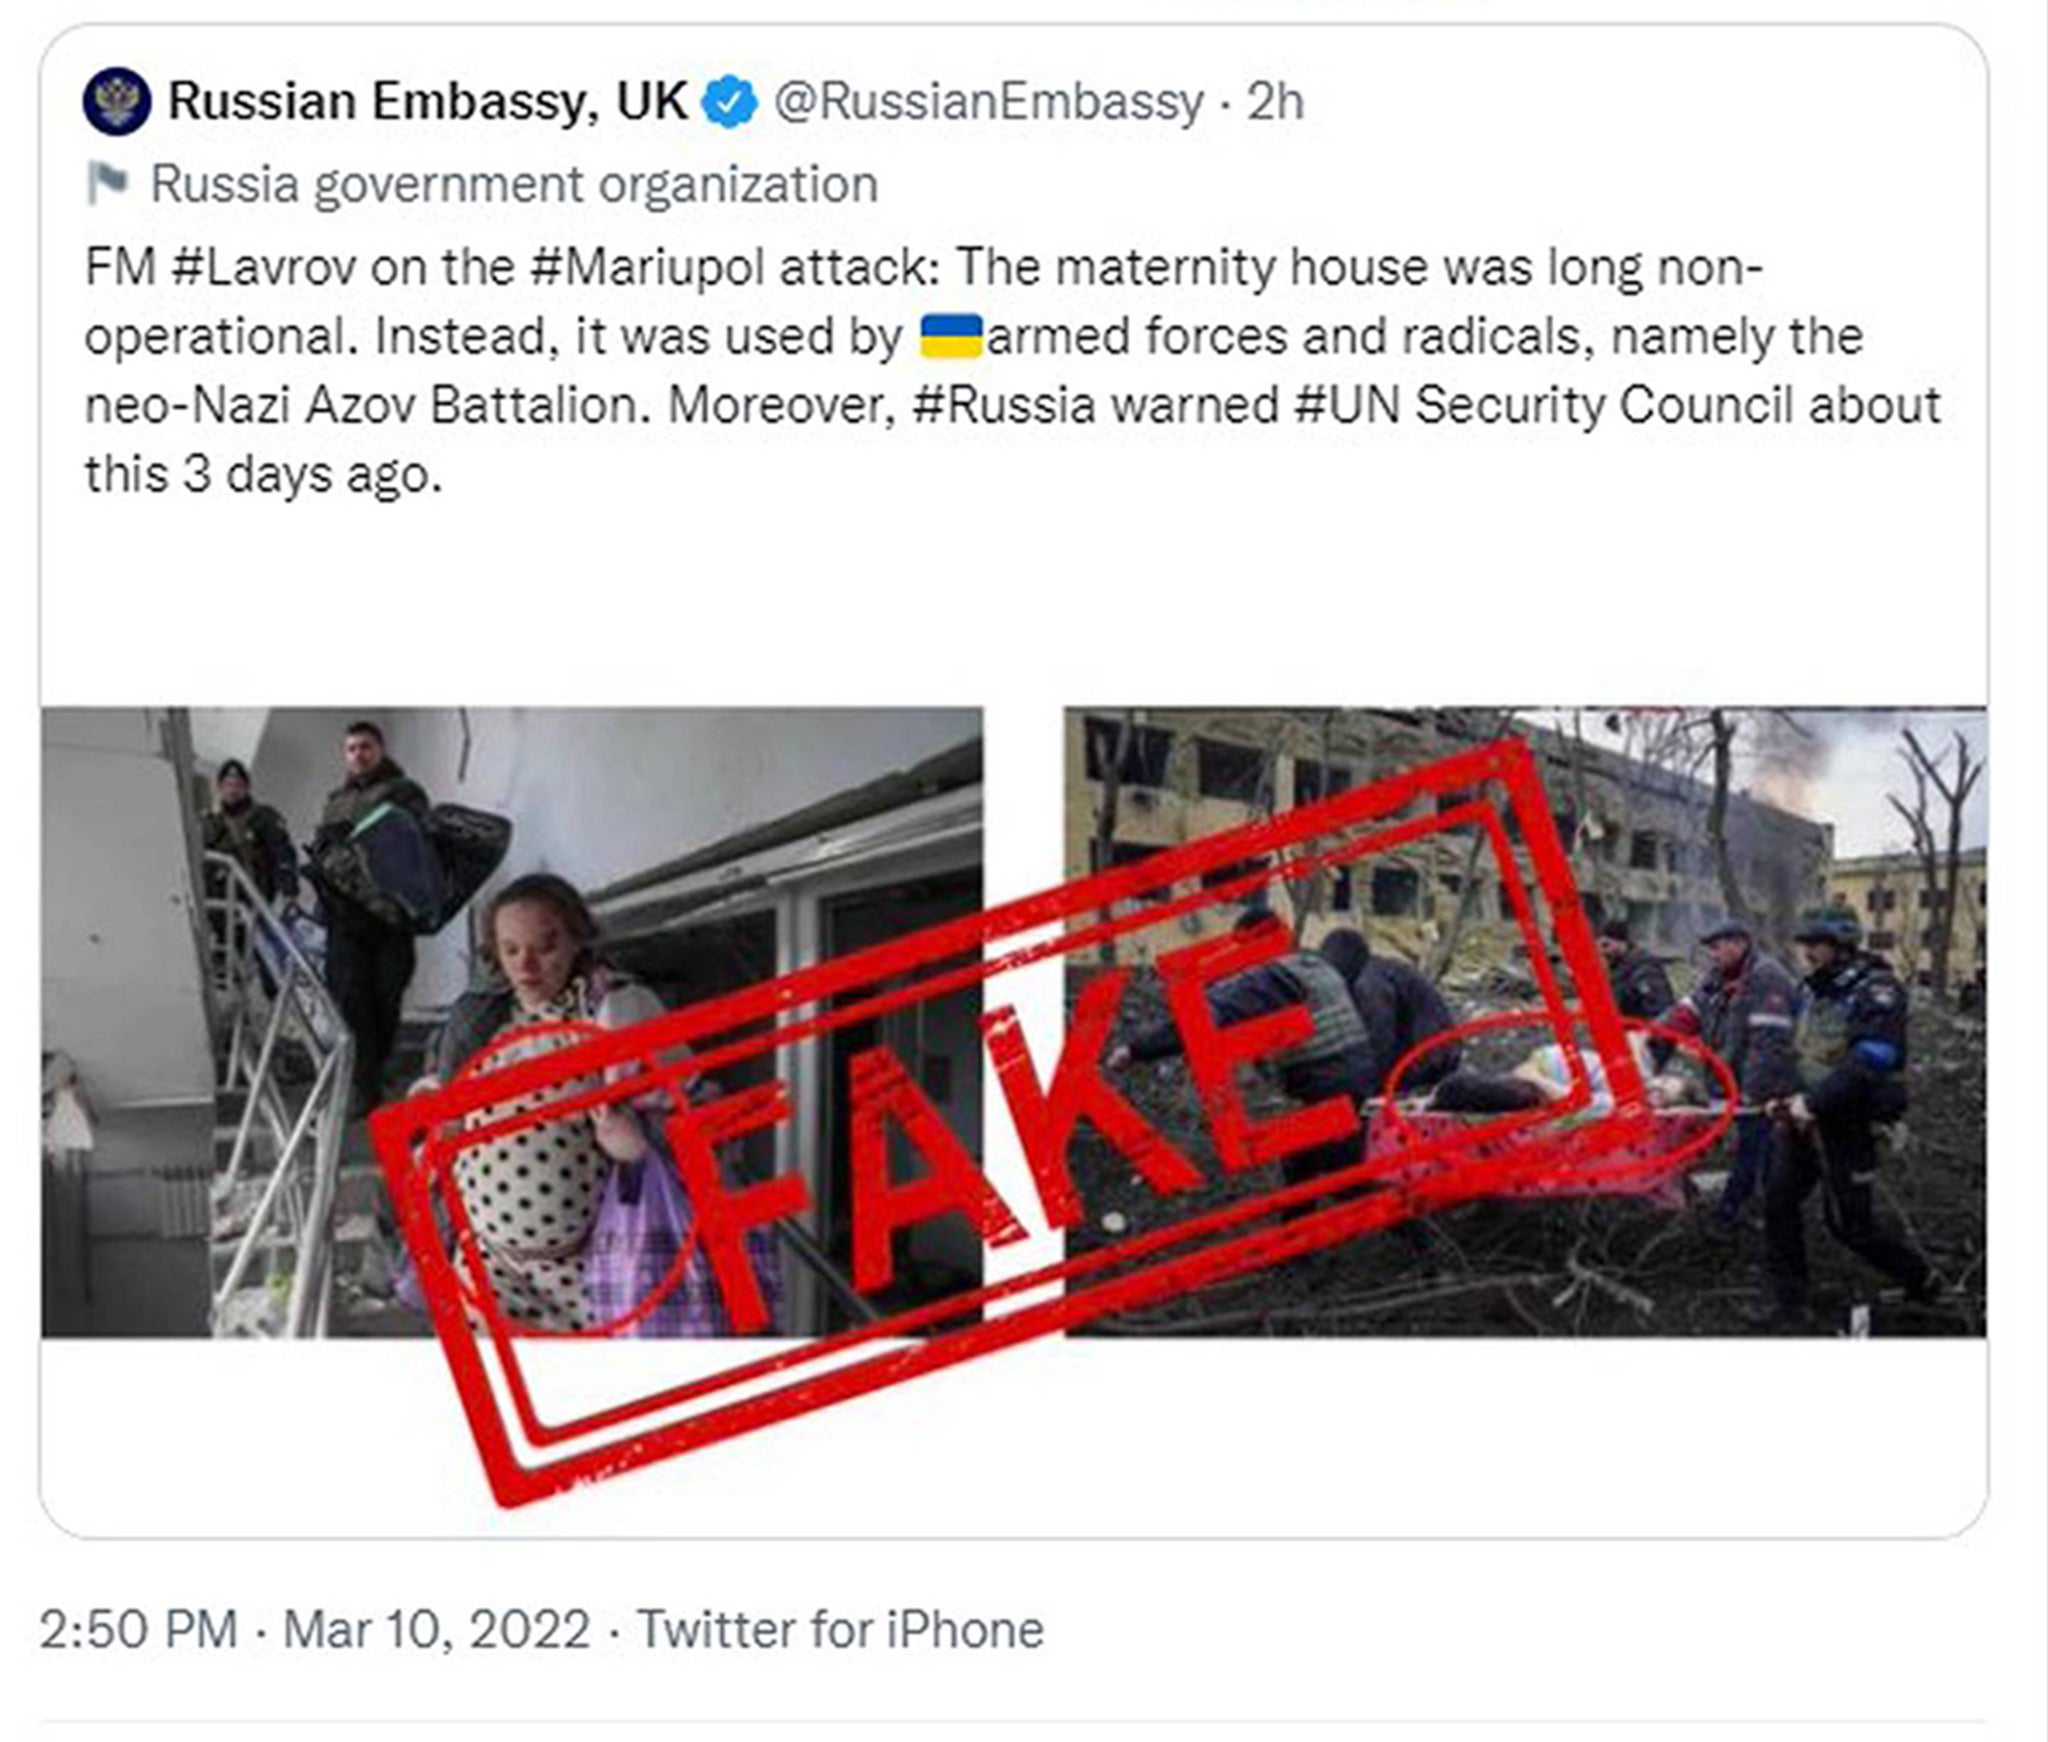 A tweet from the Russian Embassy in London which were later deleted by Twitter for violating its rules